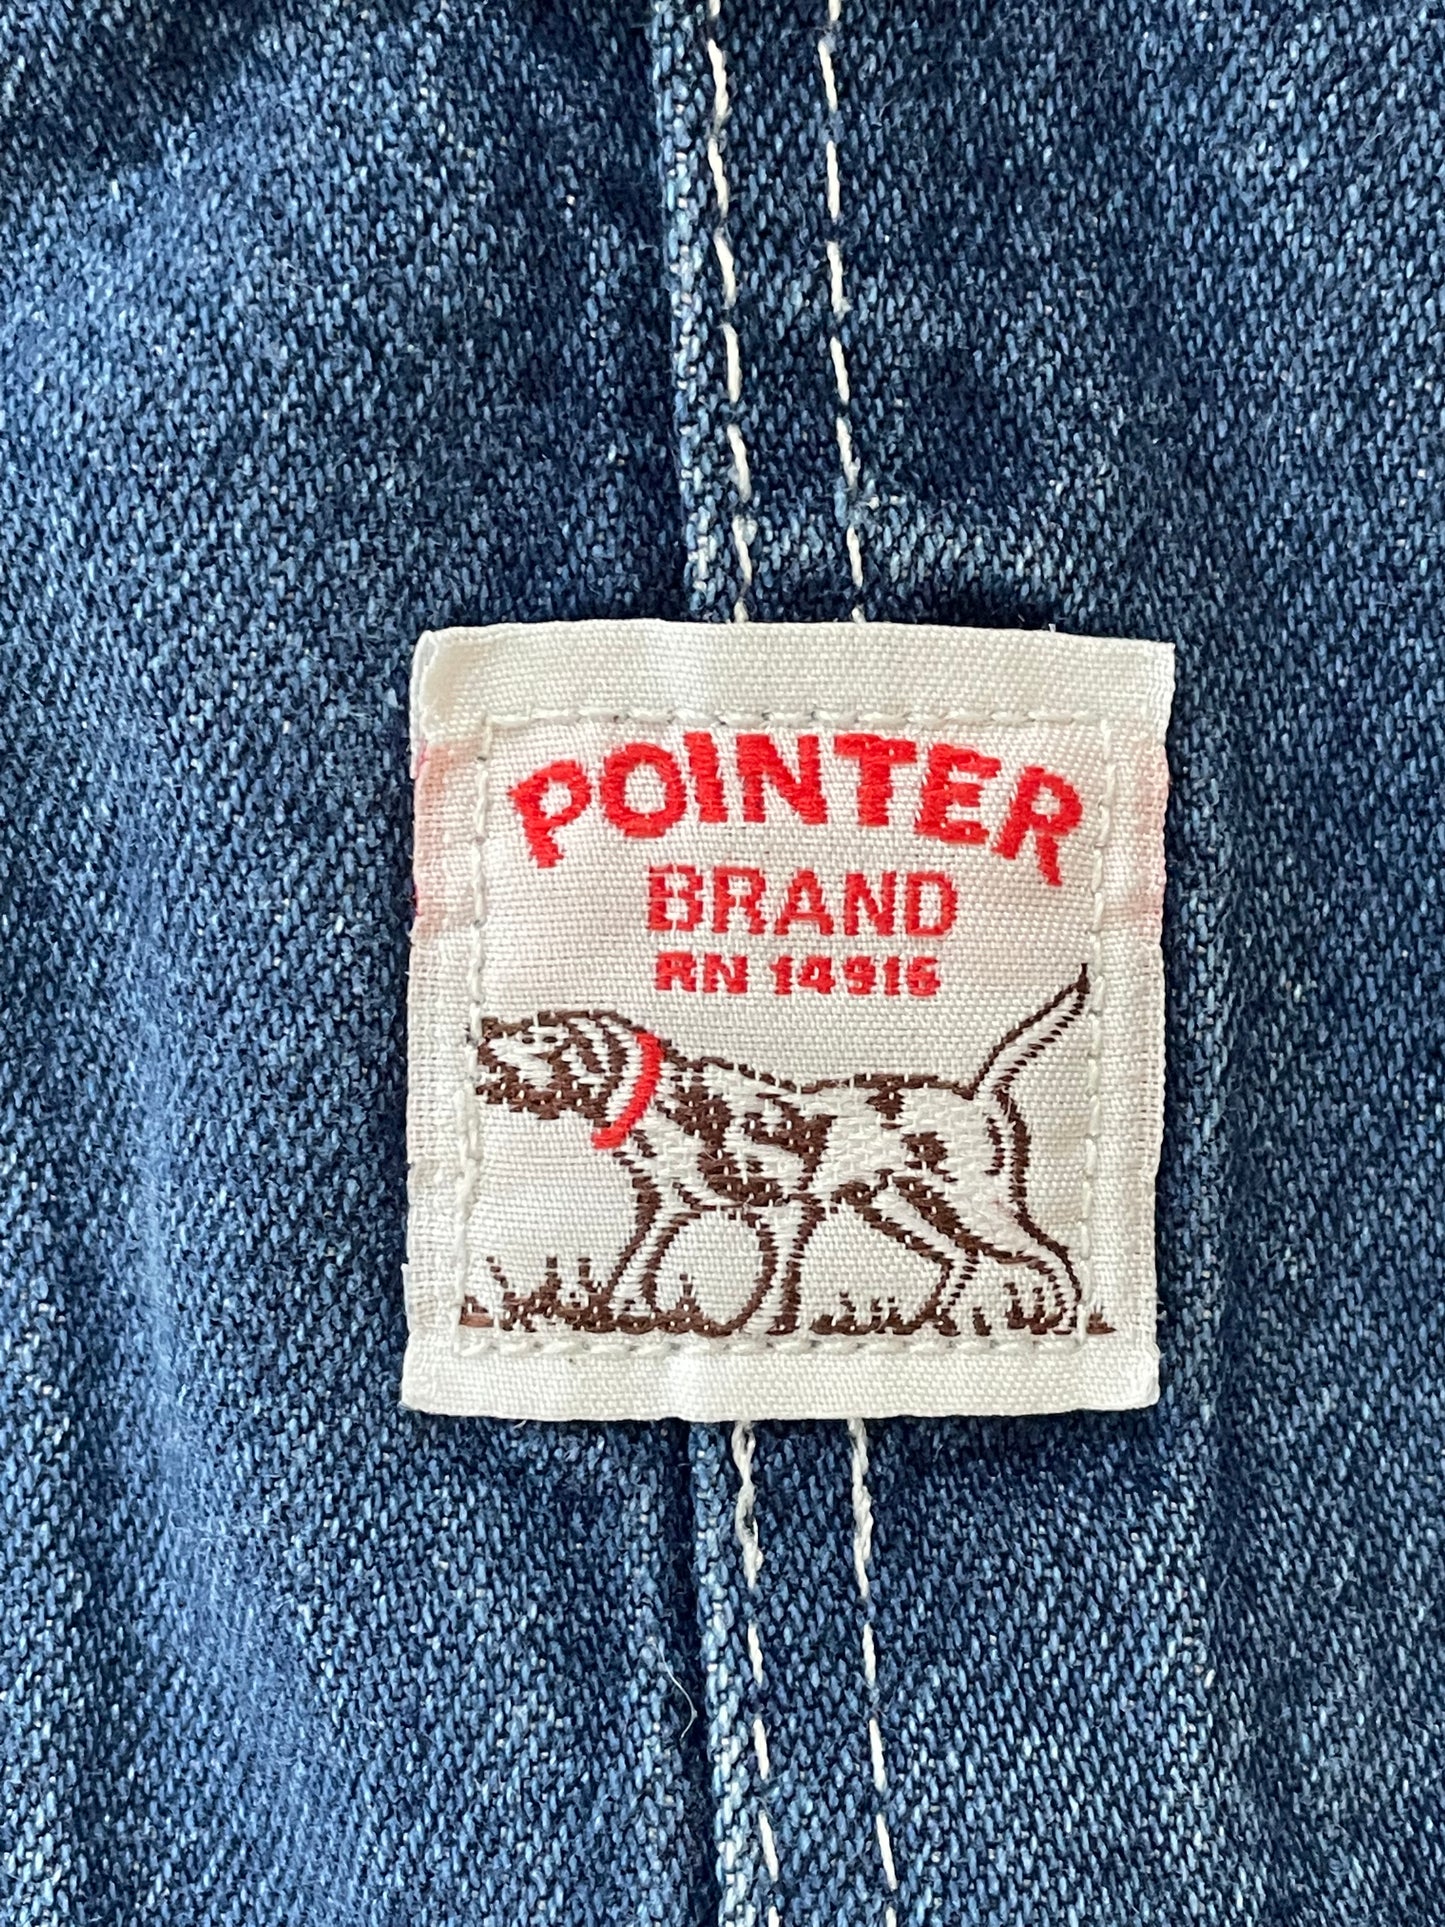 80s Pointer Brand Low-back Overalls